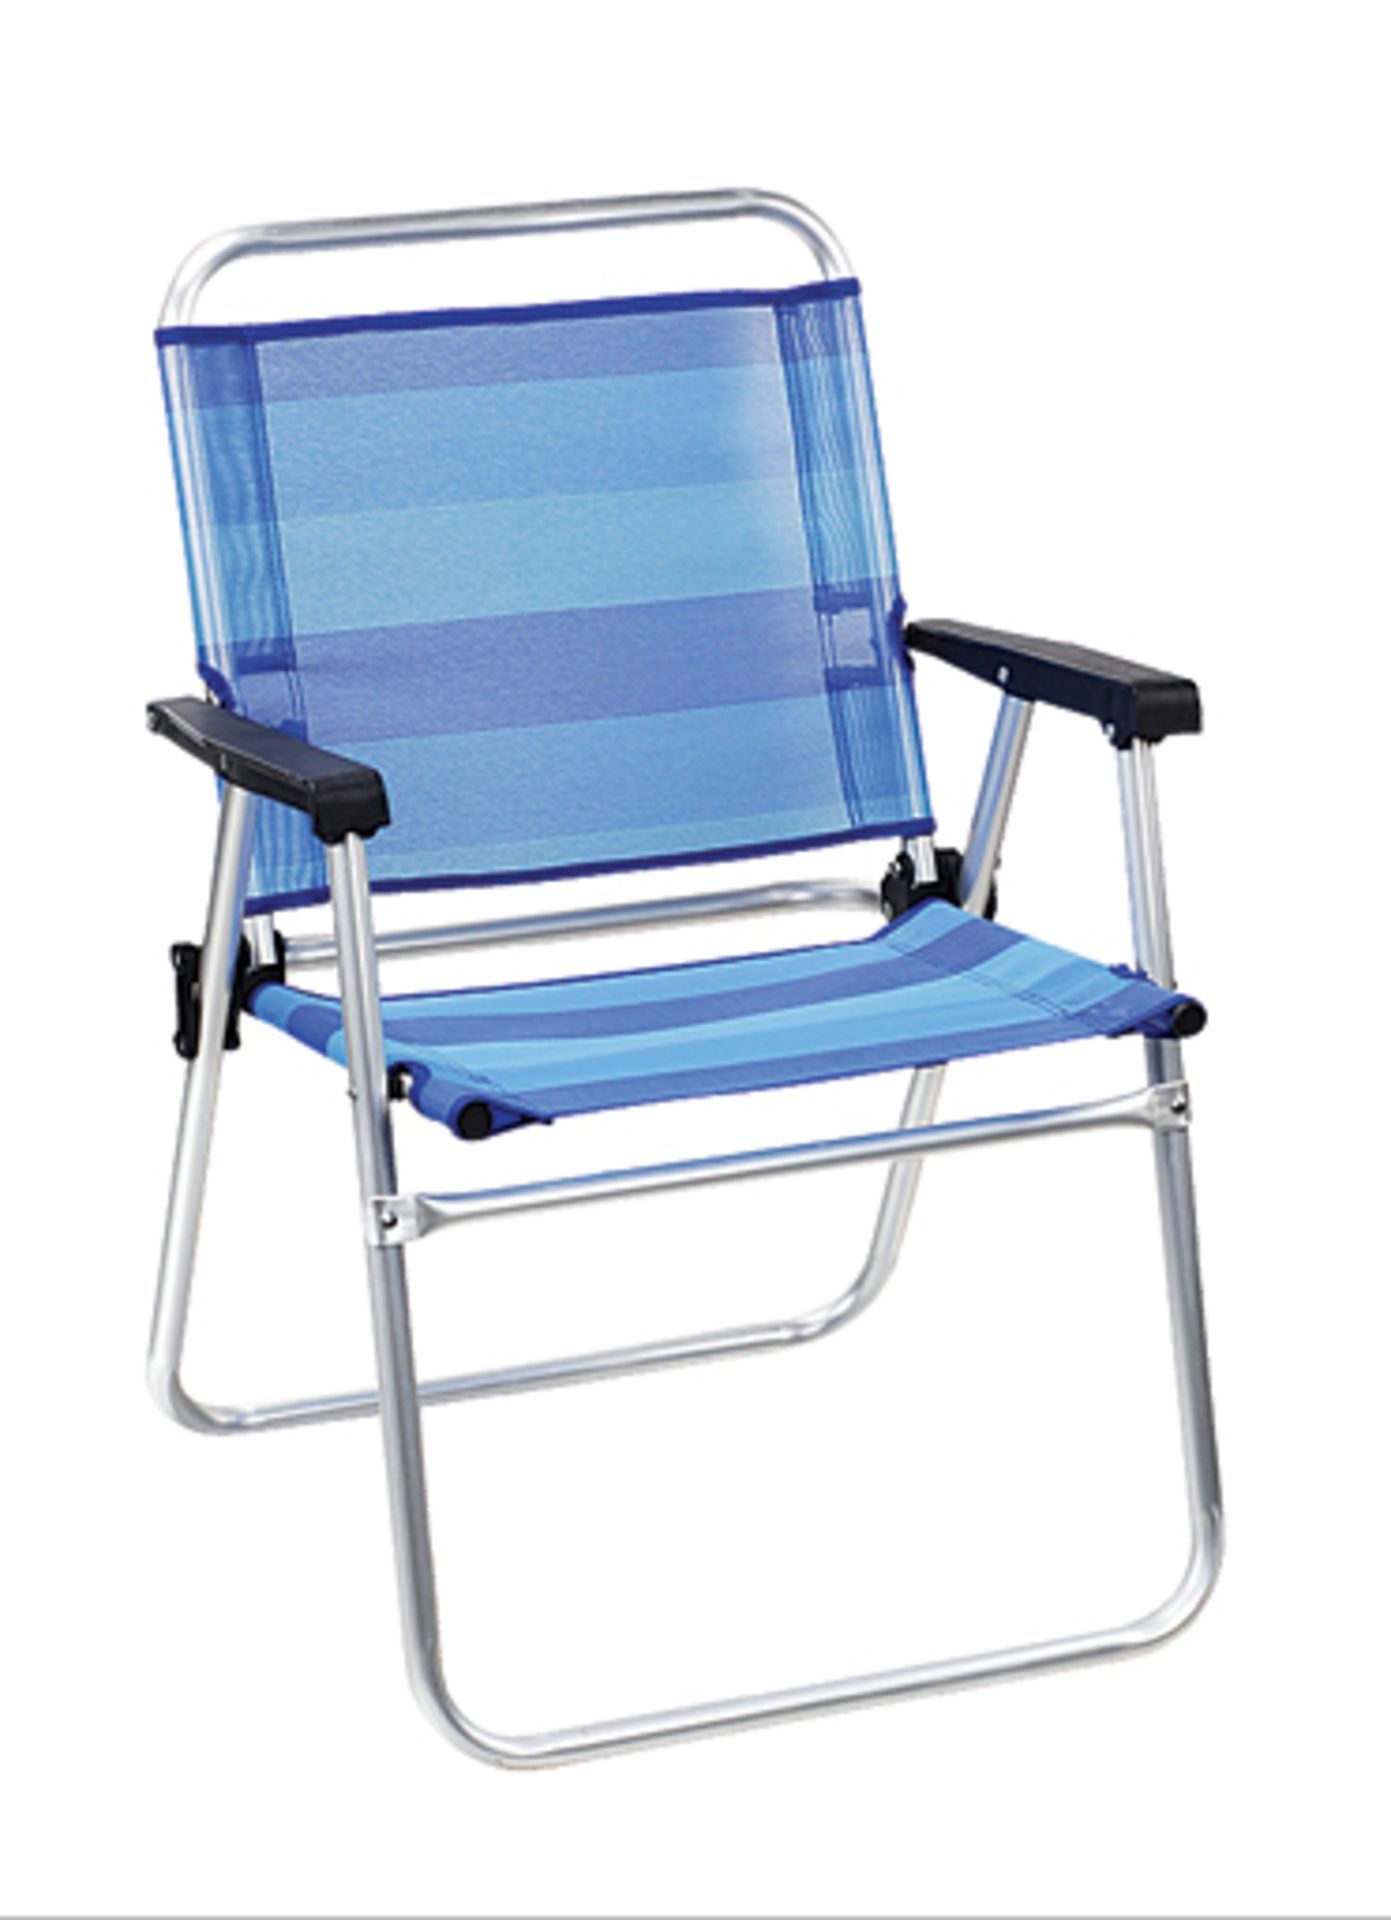 V *TRADE QTY* Brand New Folding Outdoor Chair with Cup Holder RRP £15 (similar Millets) X 6 Bid